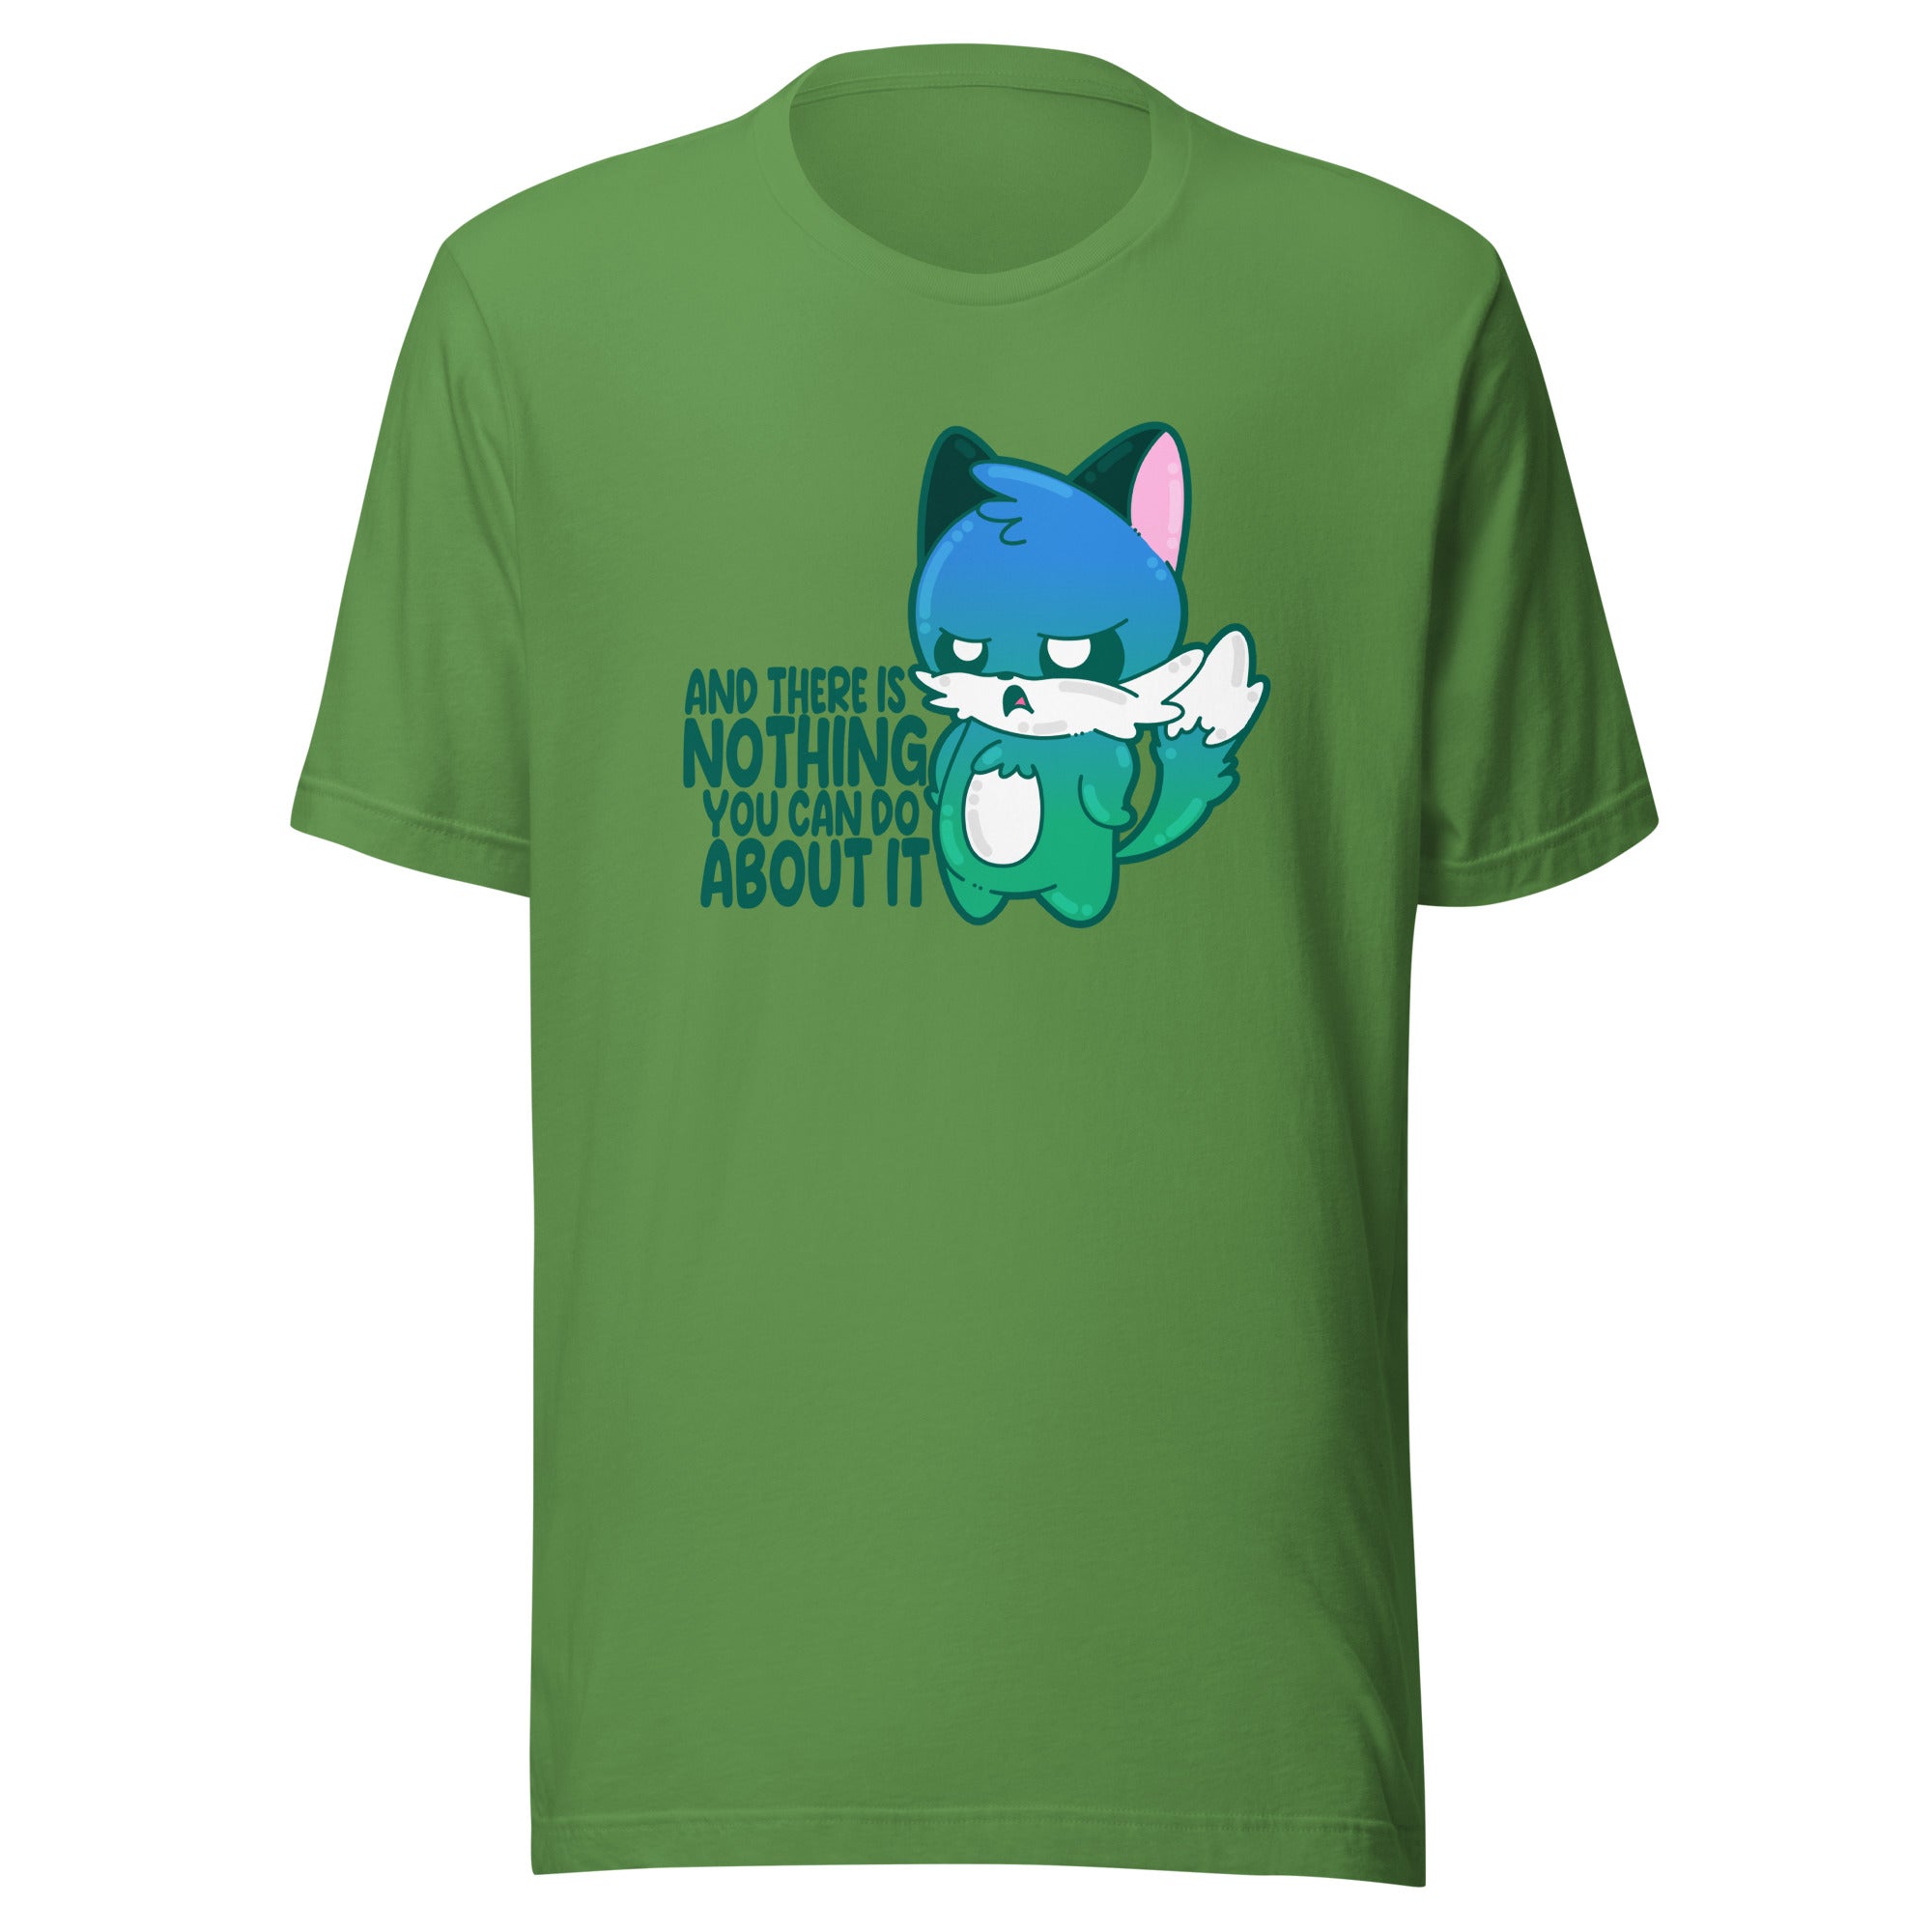 AND THERES NOTHING YOU CAN DO ABOUT IT - Tee - ChubbleGumLLC